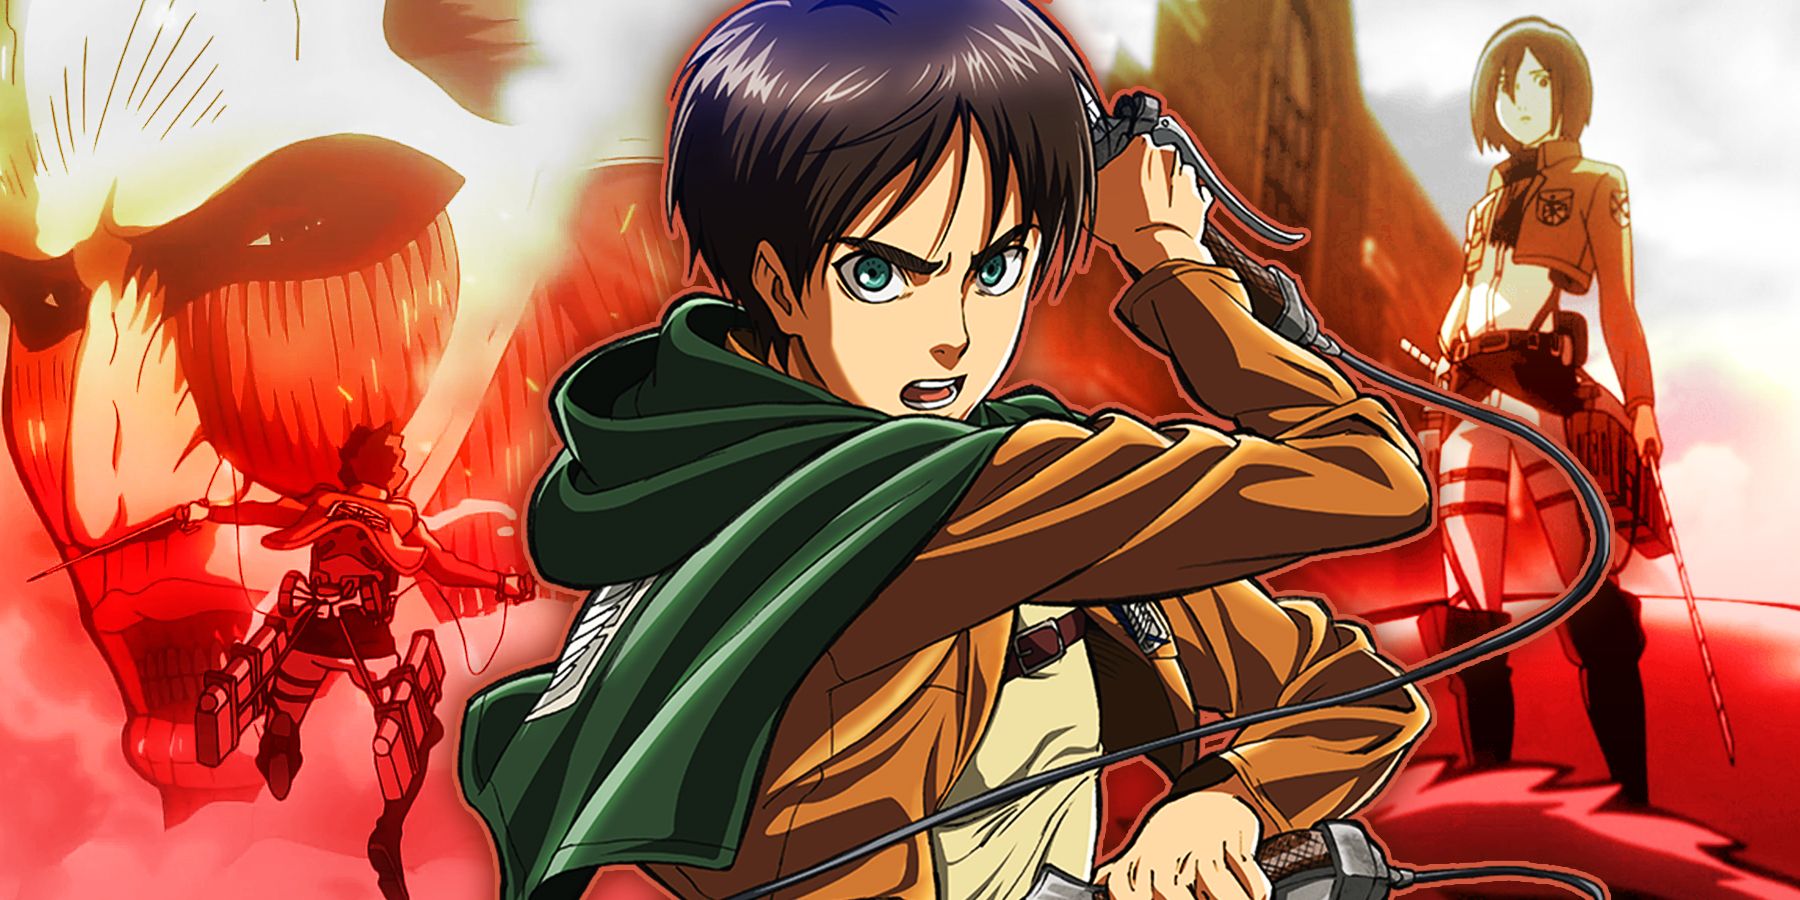 Attack on Titan's Reign May Finally End Because of Another Shonen Anime